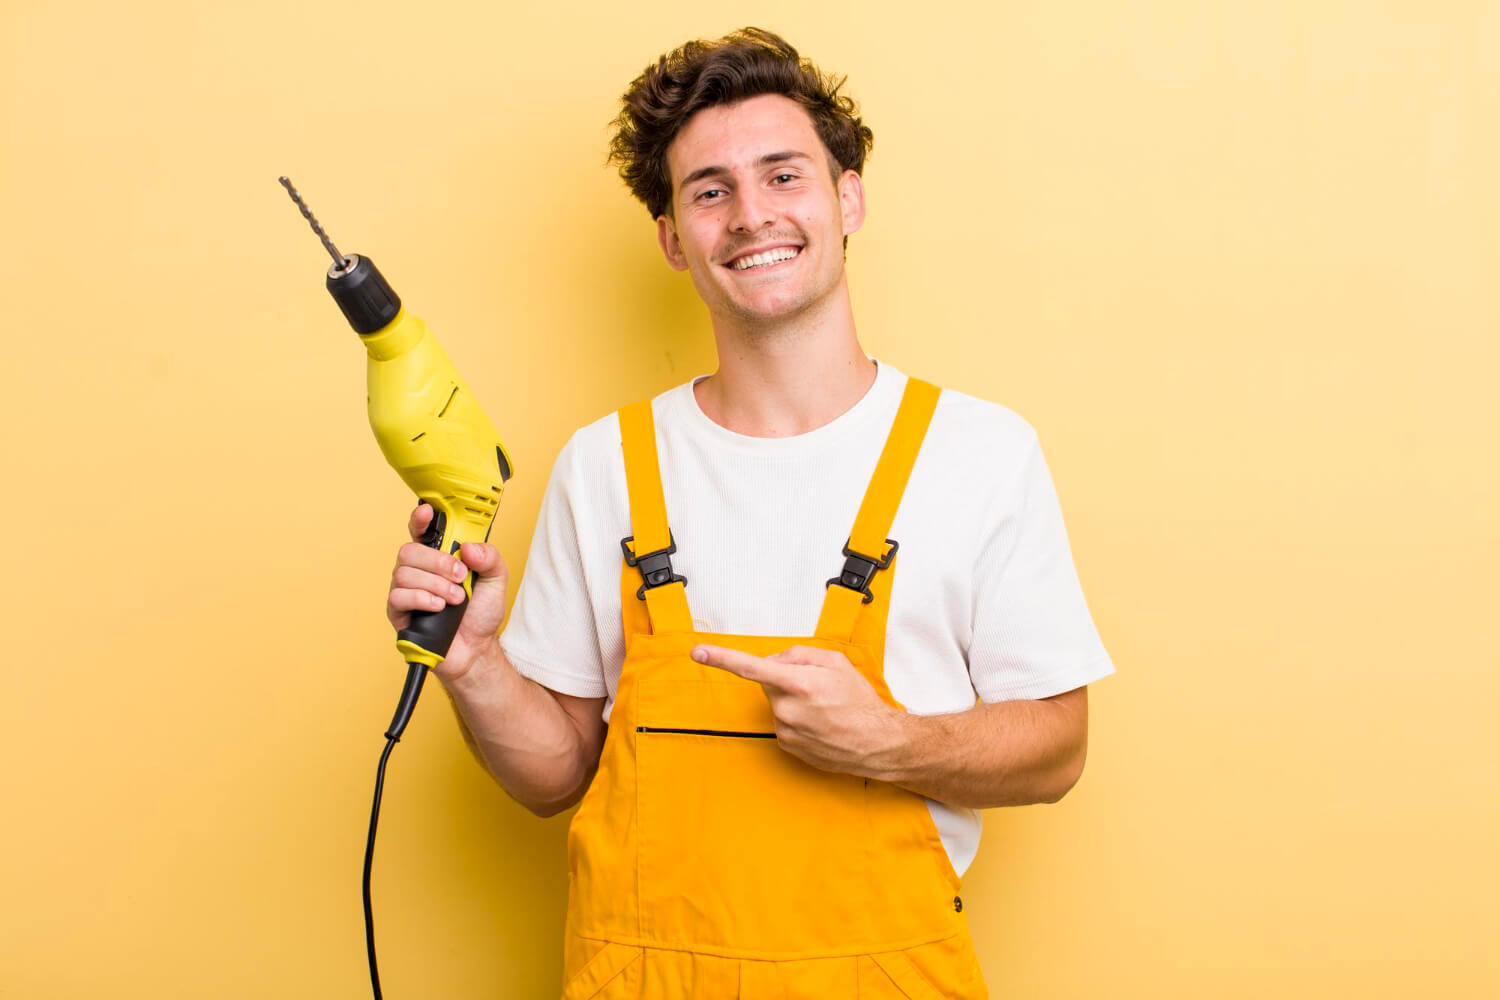 smiley handyman with yellow uniform holds drill and smiling on camera